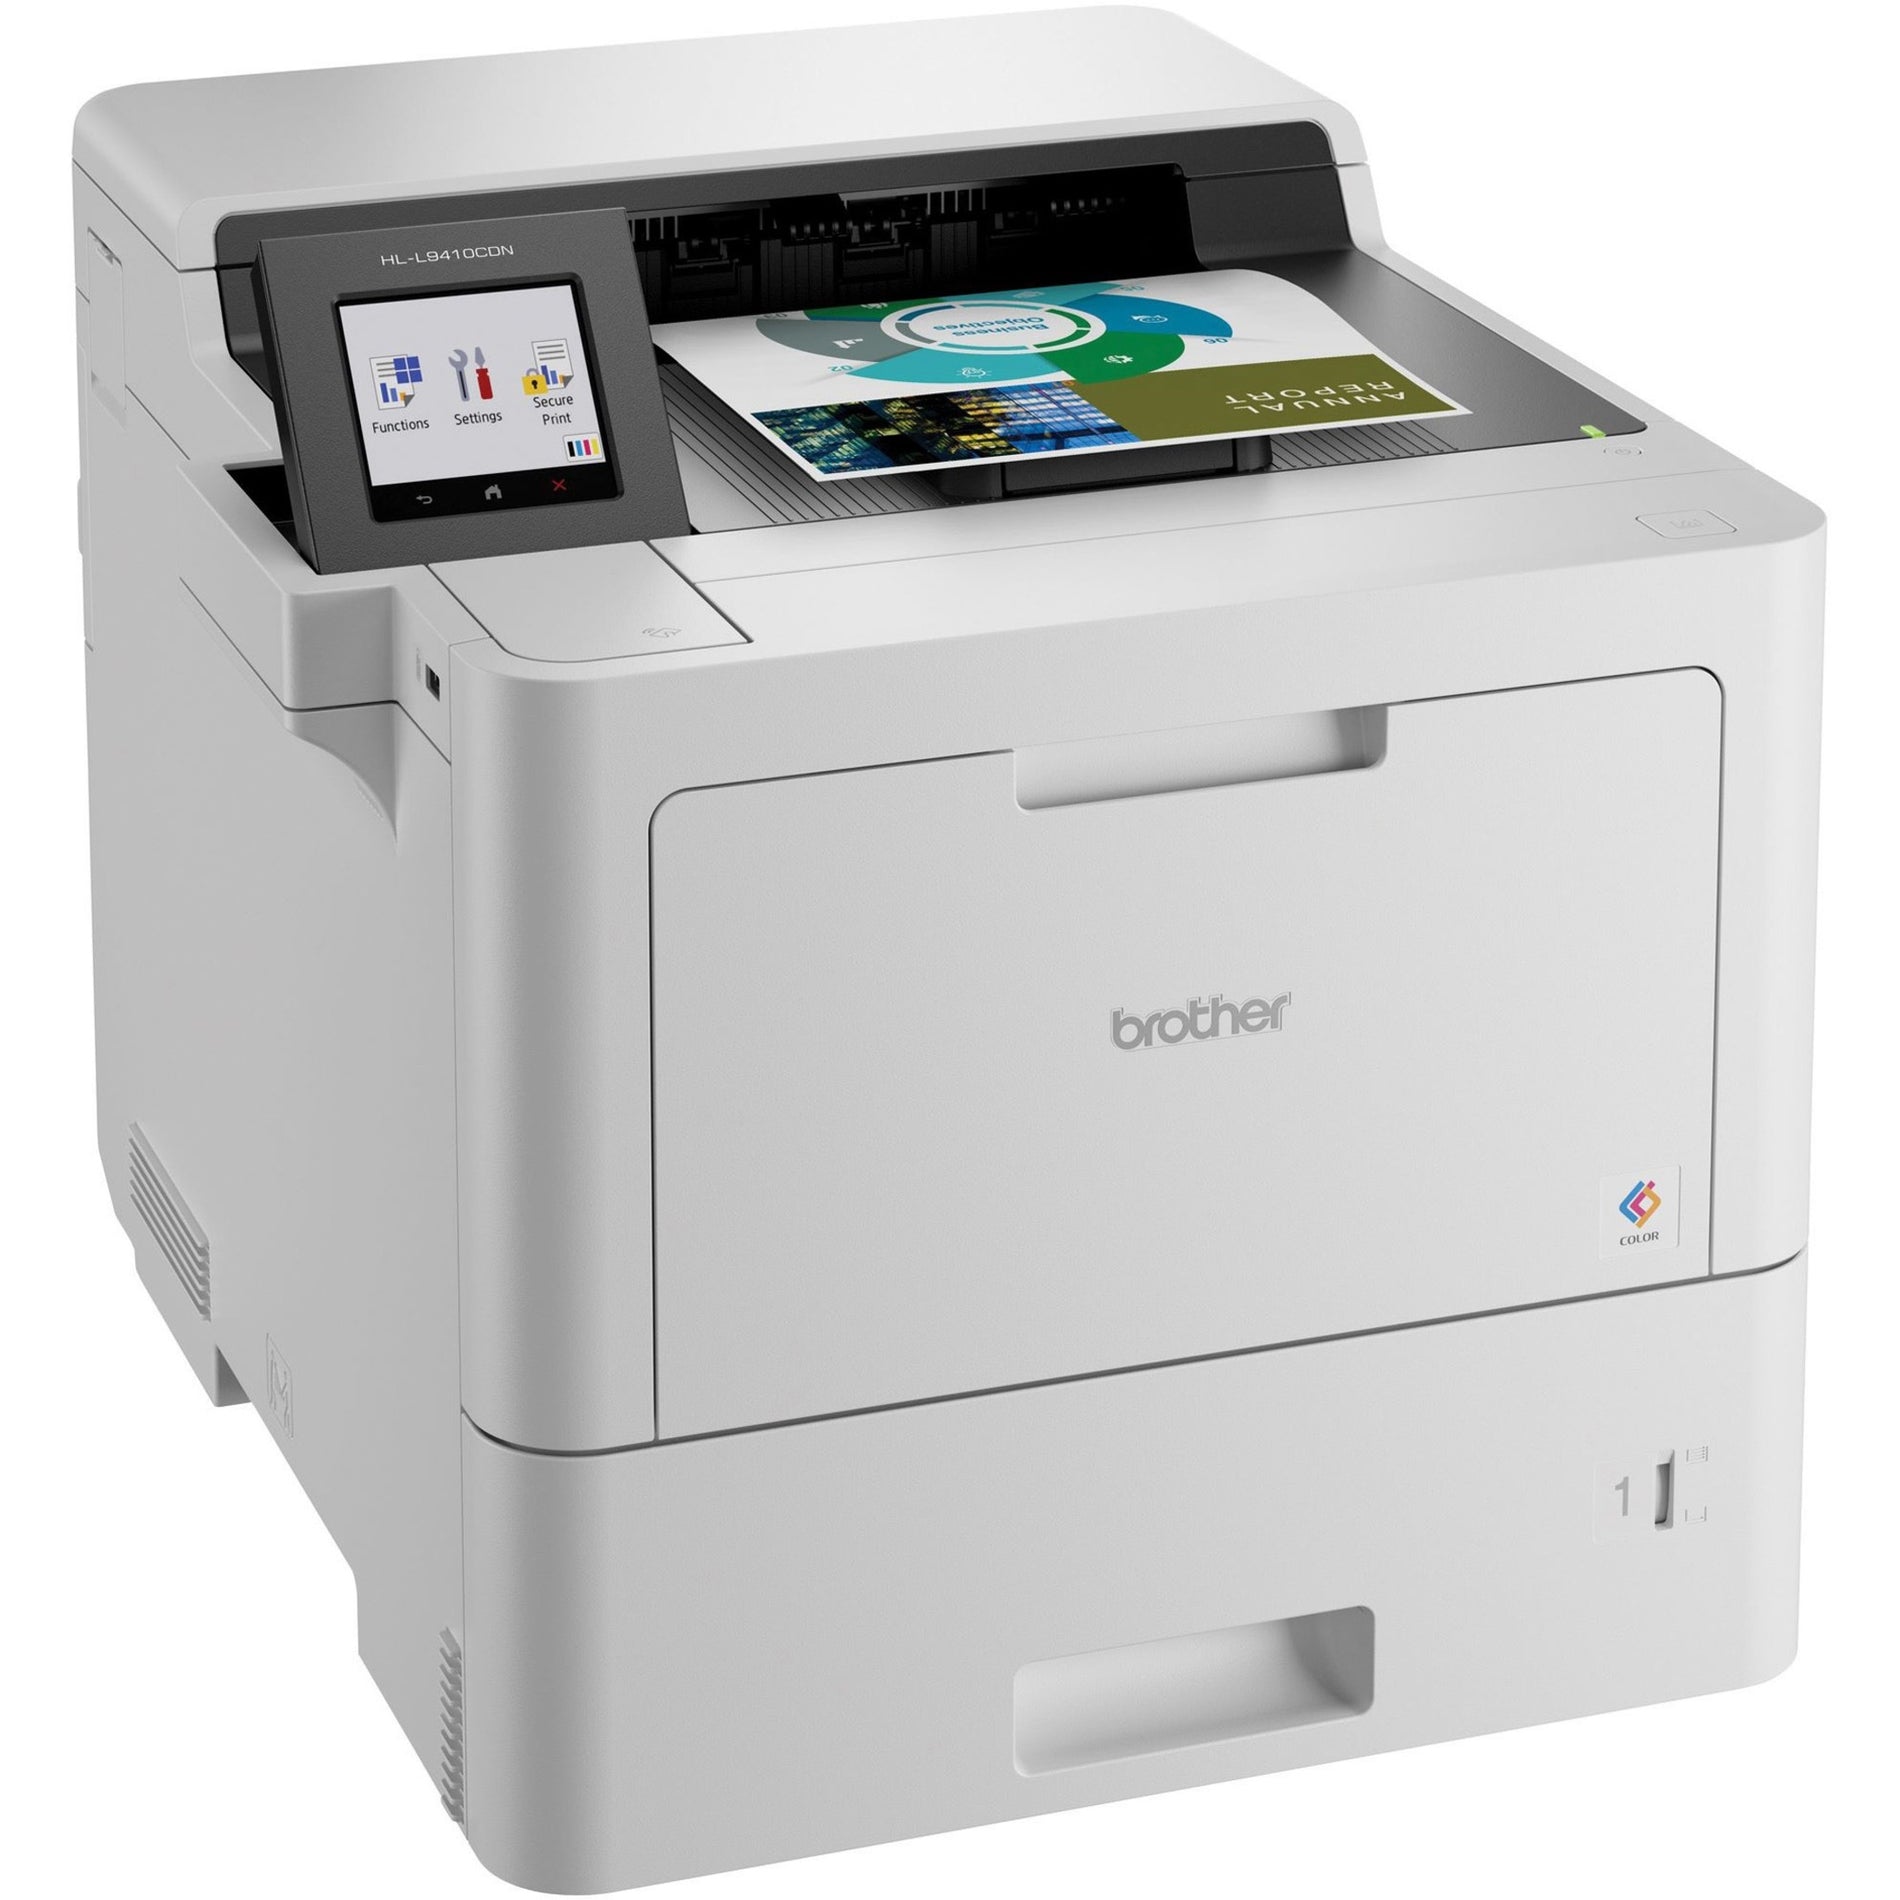 Brother HLL9410CDN HL-L9410CDN Enterprise Color Laser Printer, Fast Printing, Large Paper Capacity, Advanced Security Features